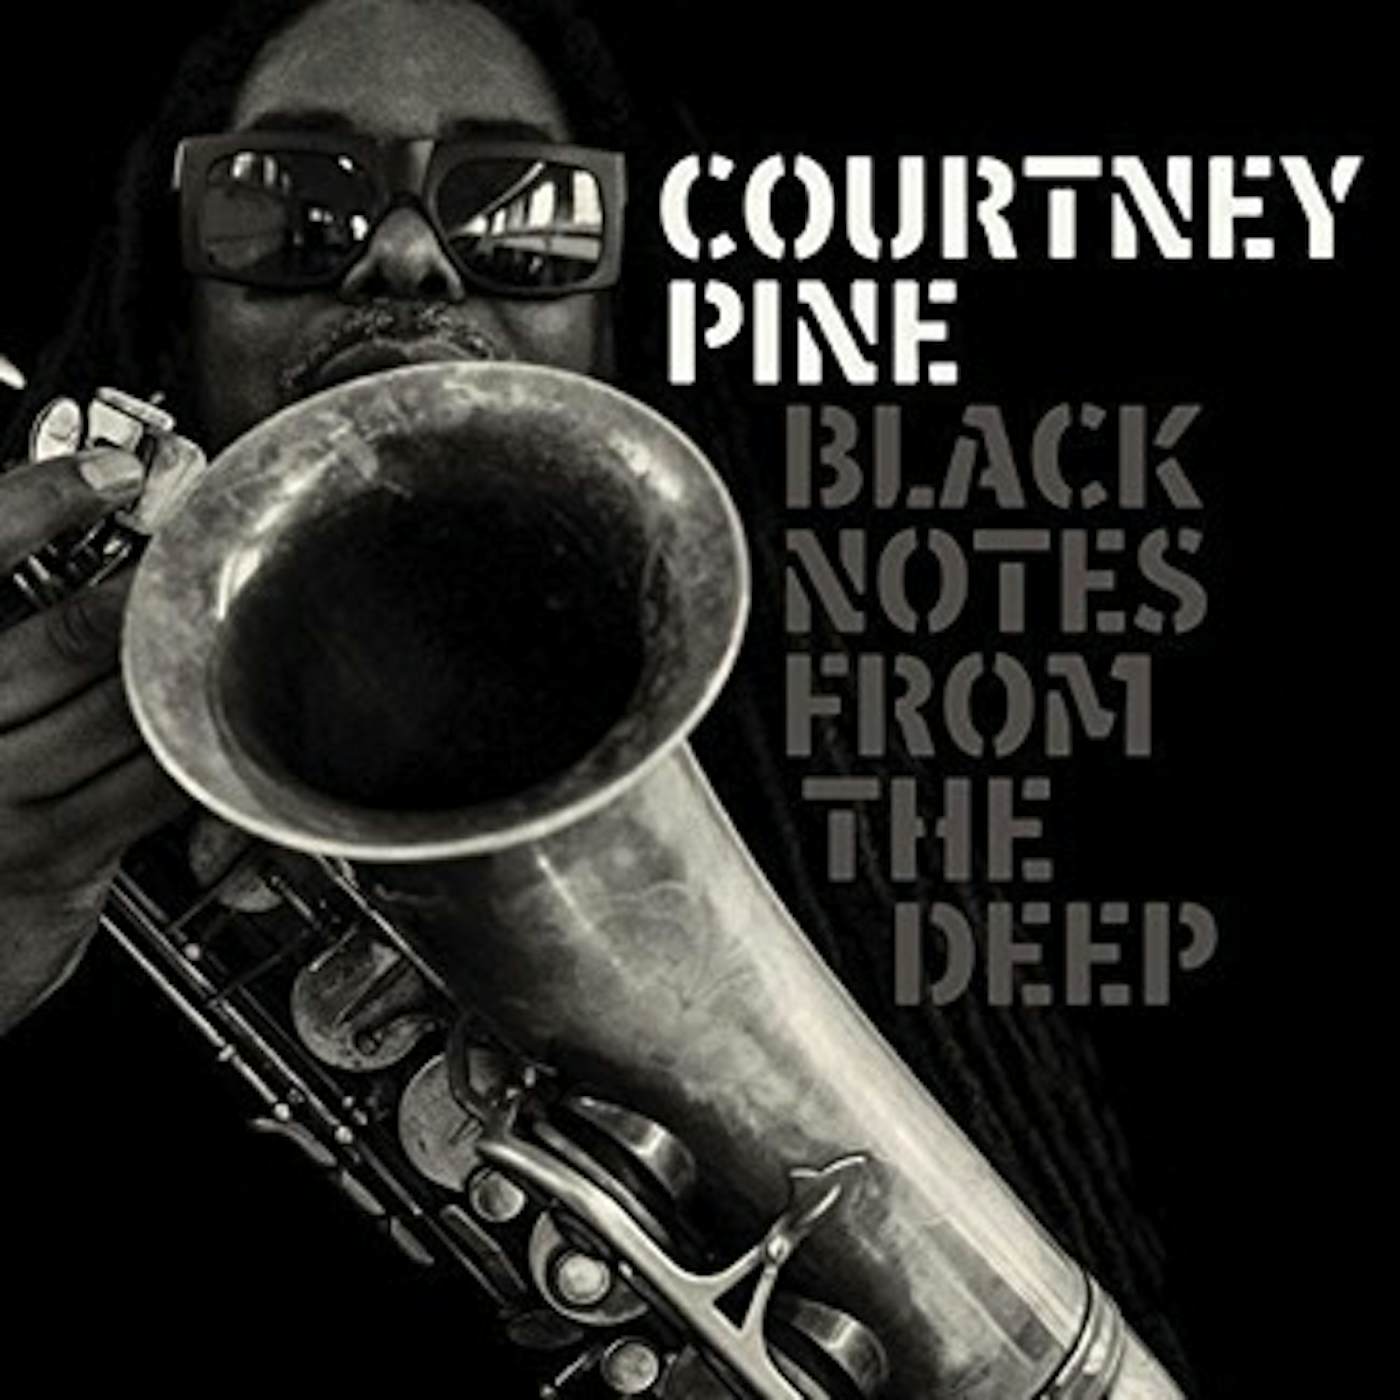 Courtney Pine Black Notes From The Deep Vinyl Record